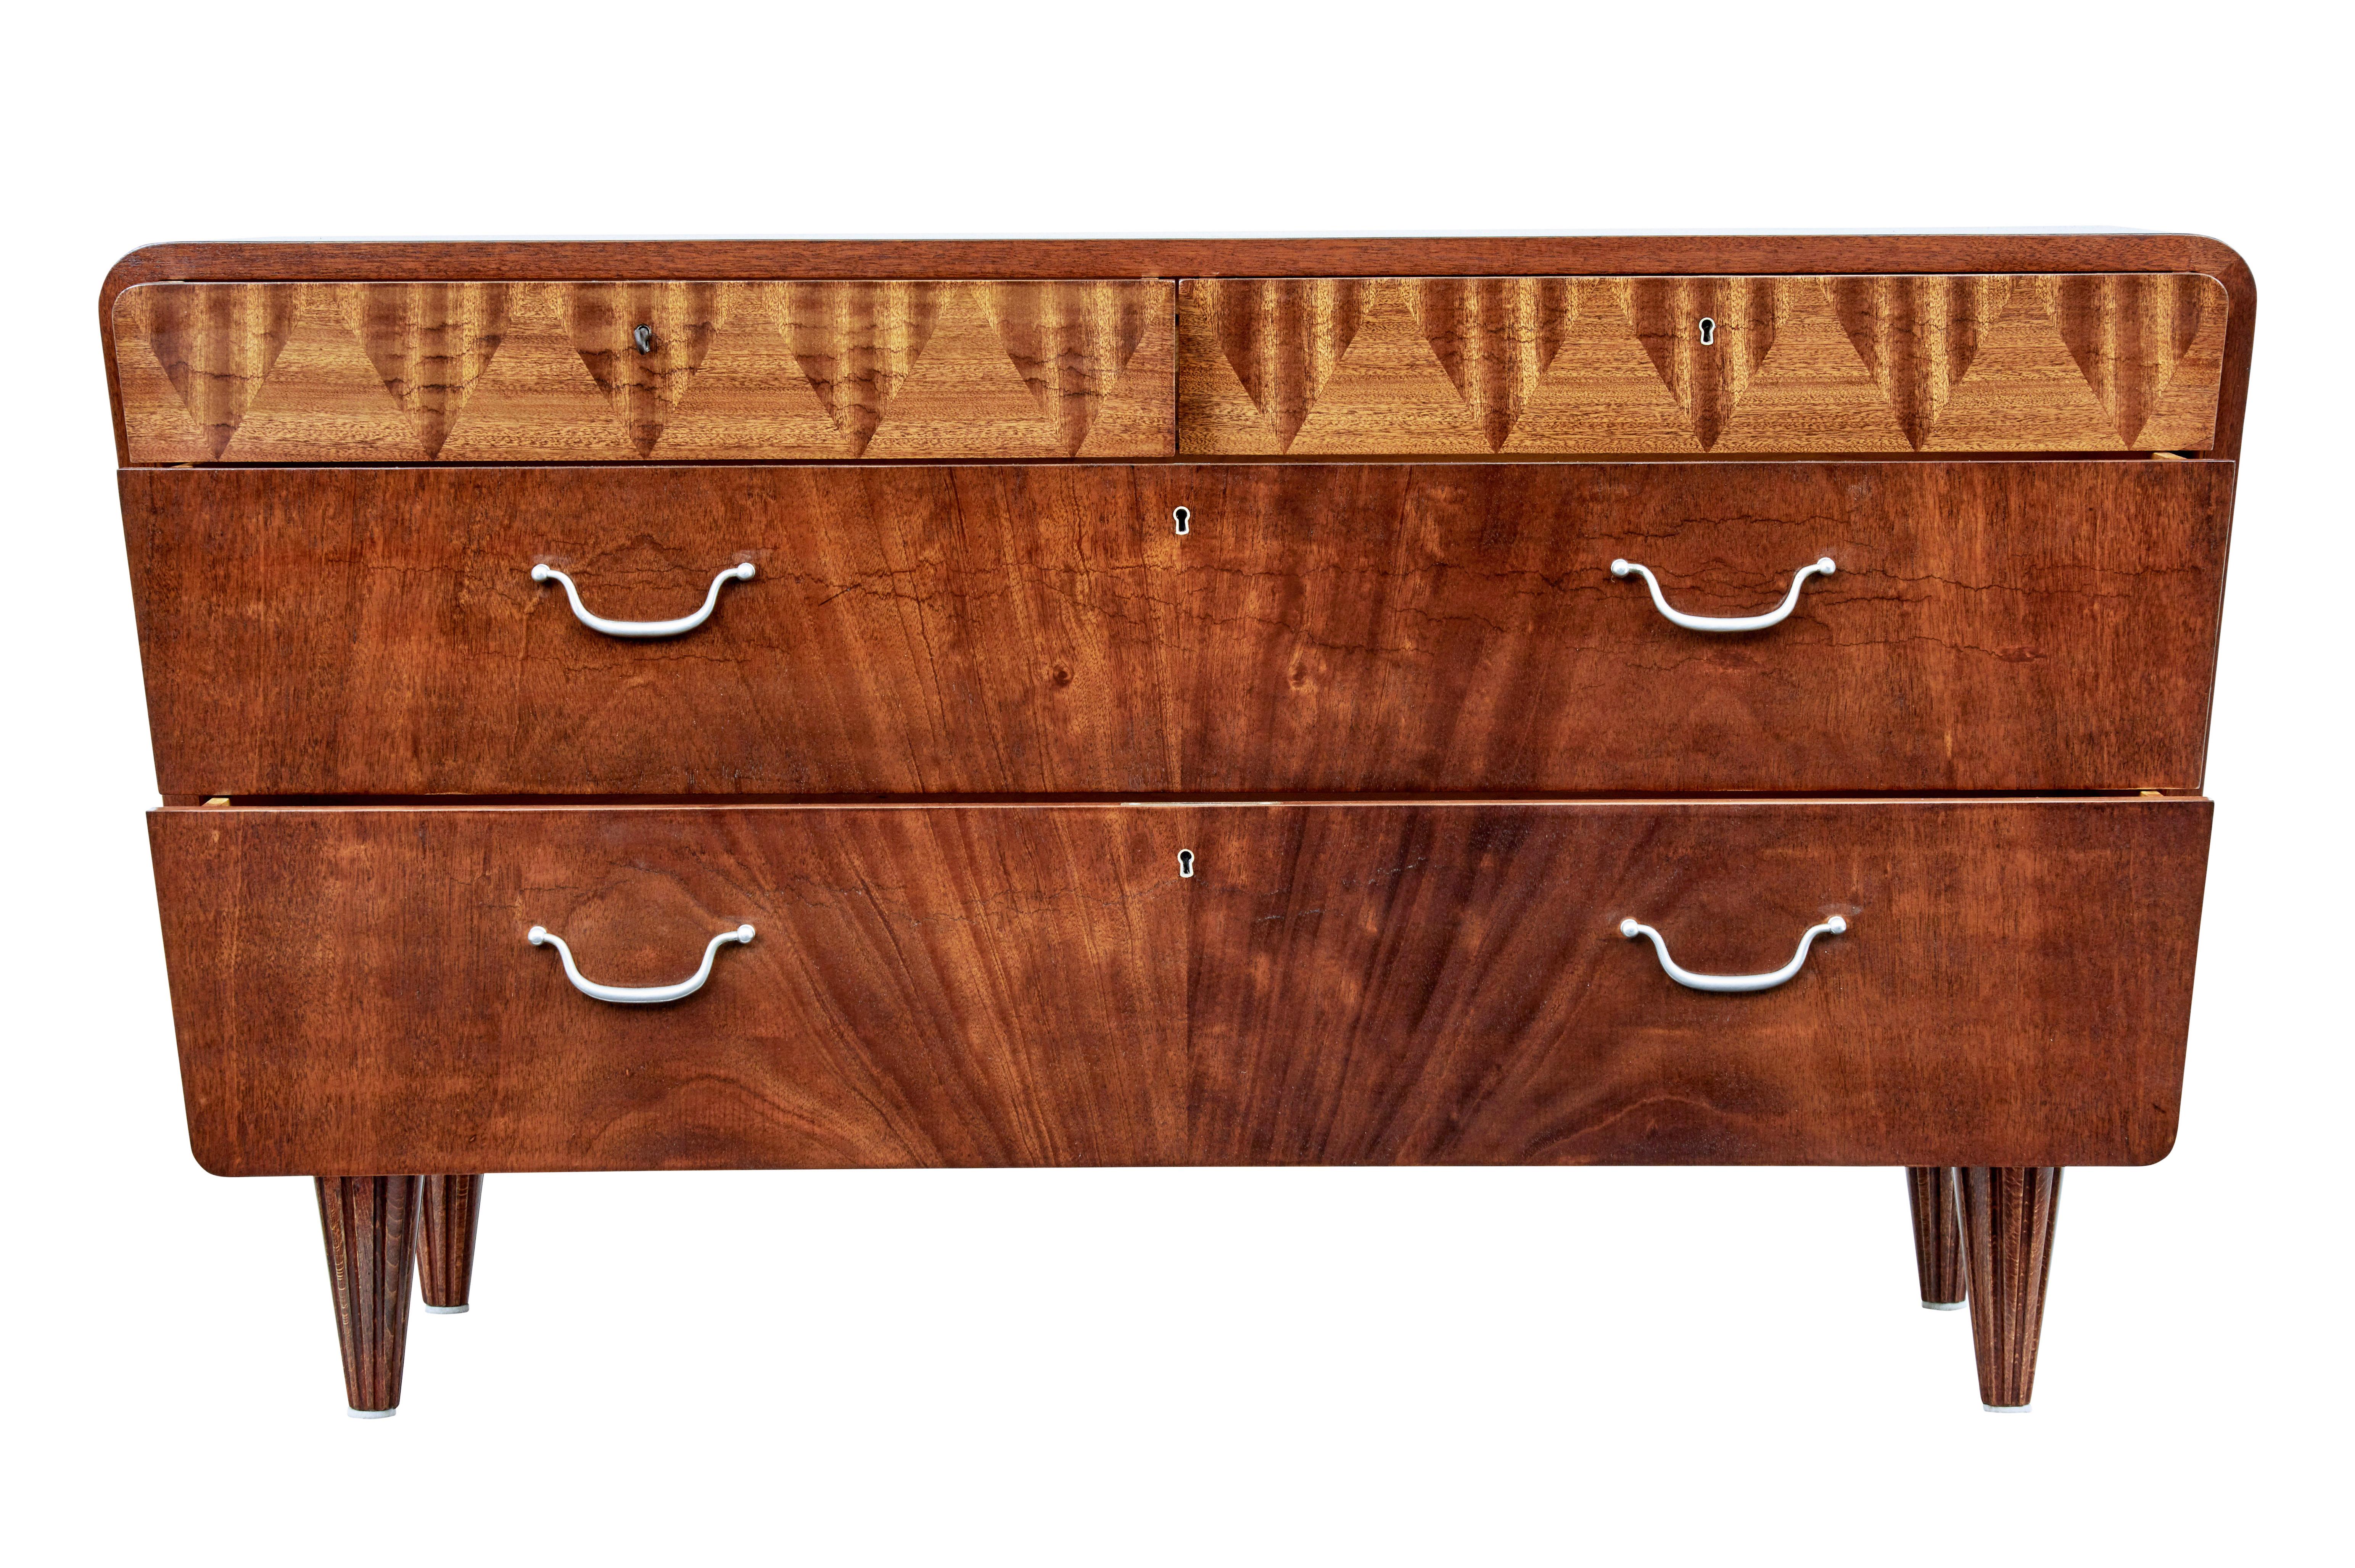 Art Deco Mid 20th century Scandinavian modern mahogany chest of drawers For Sale